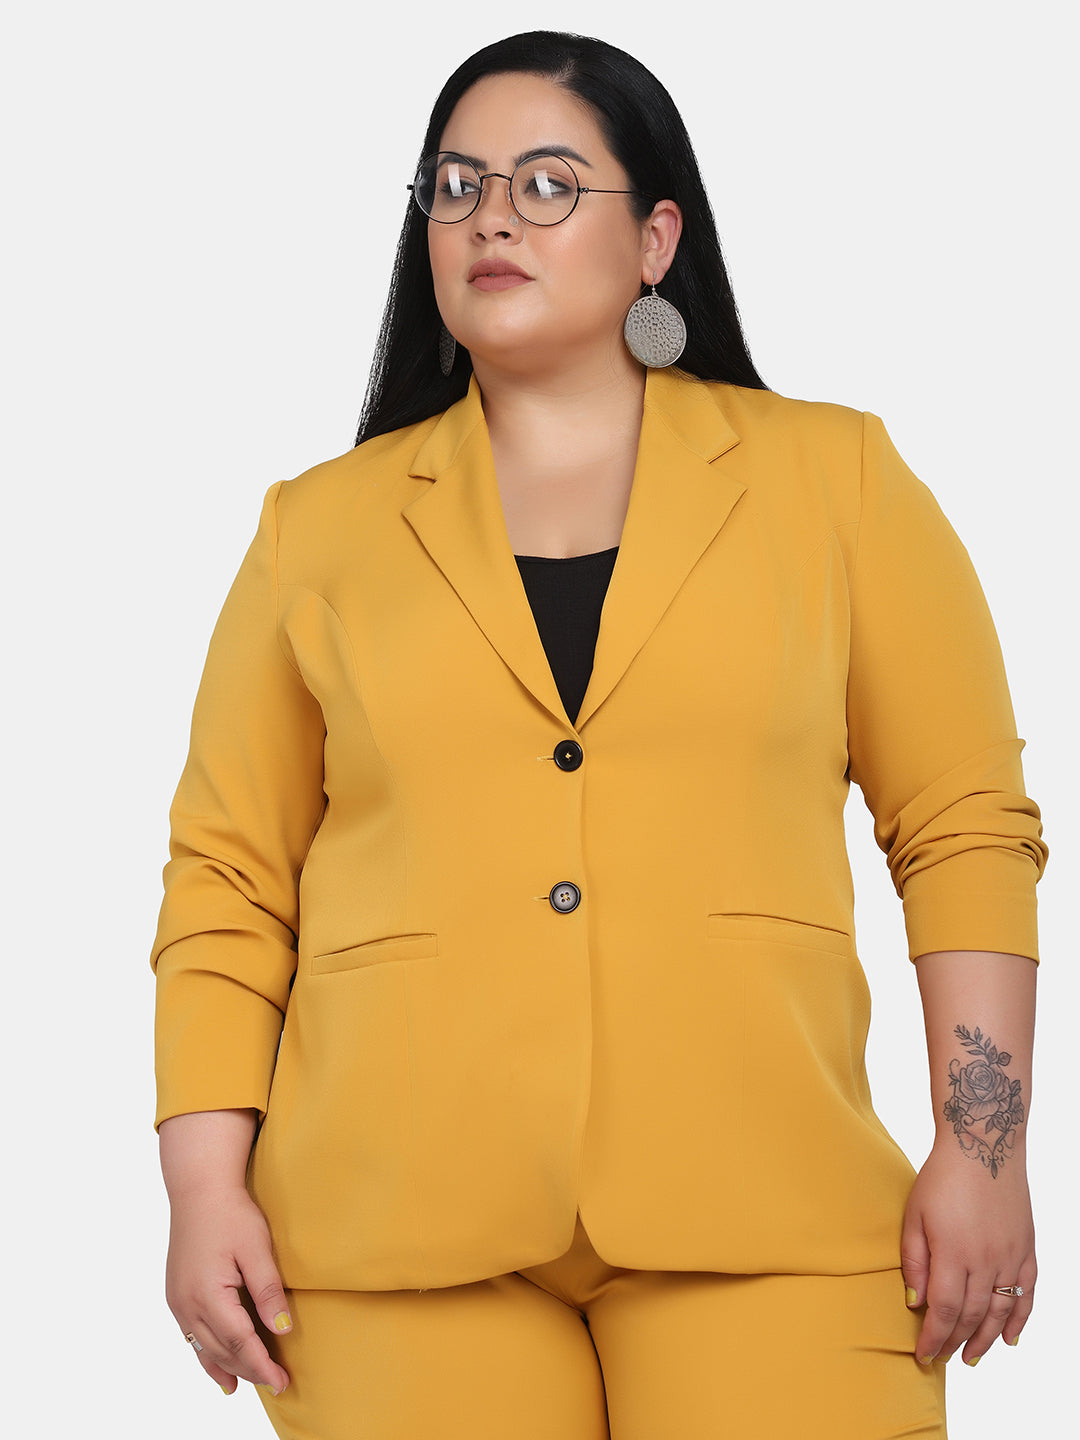 Women’s Formal Pant Suit For Work- Mustard Yellow